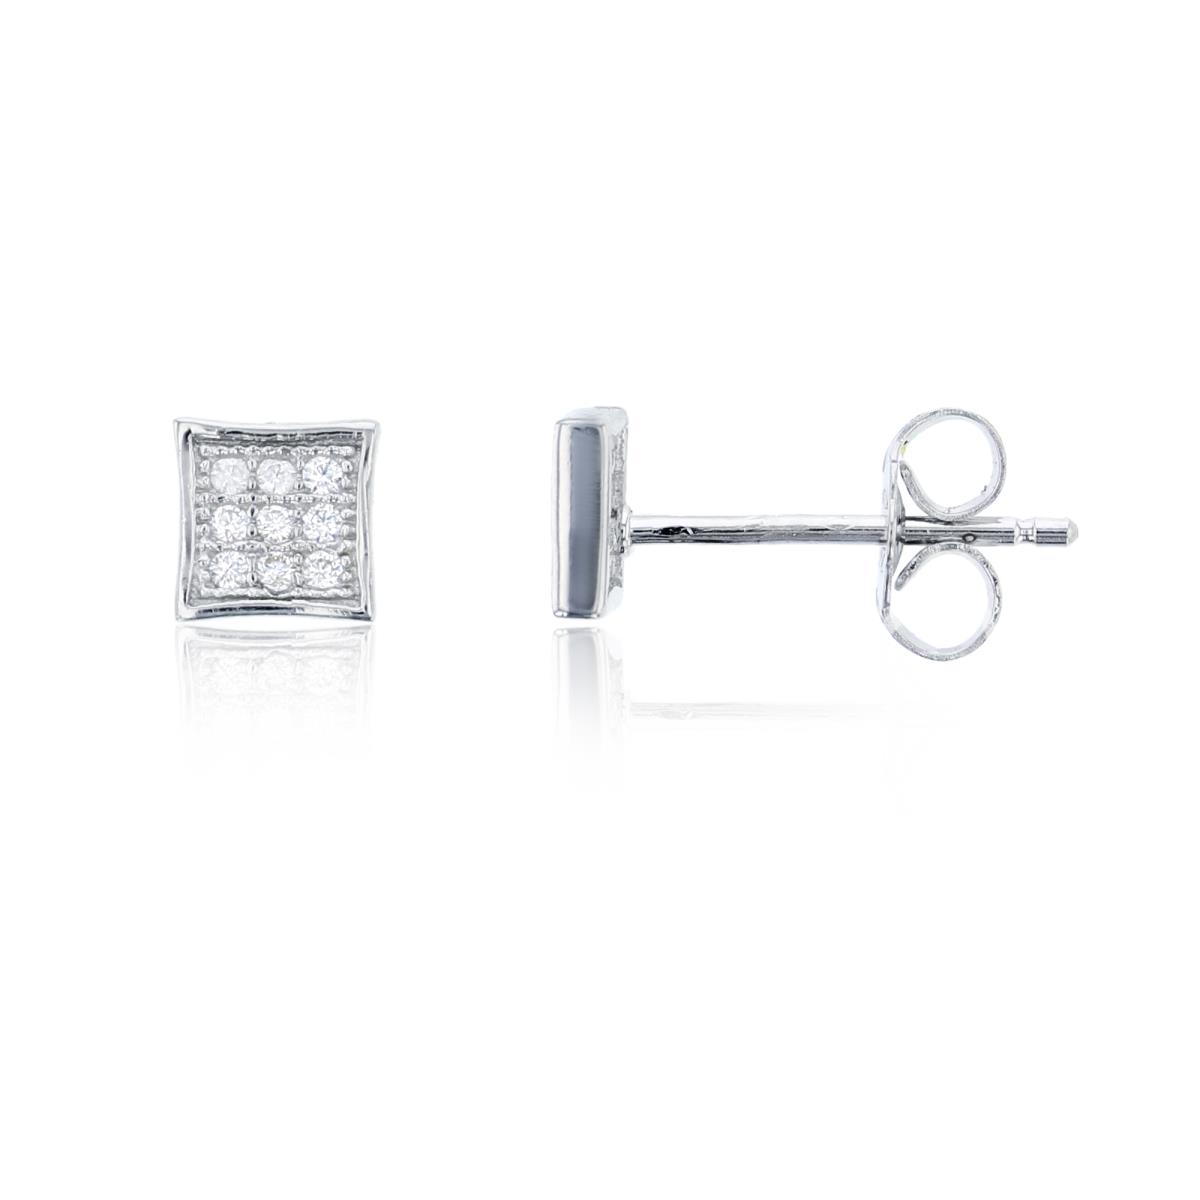 Sterling Silver 6mm Curved Square Stud Earring